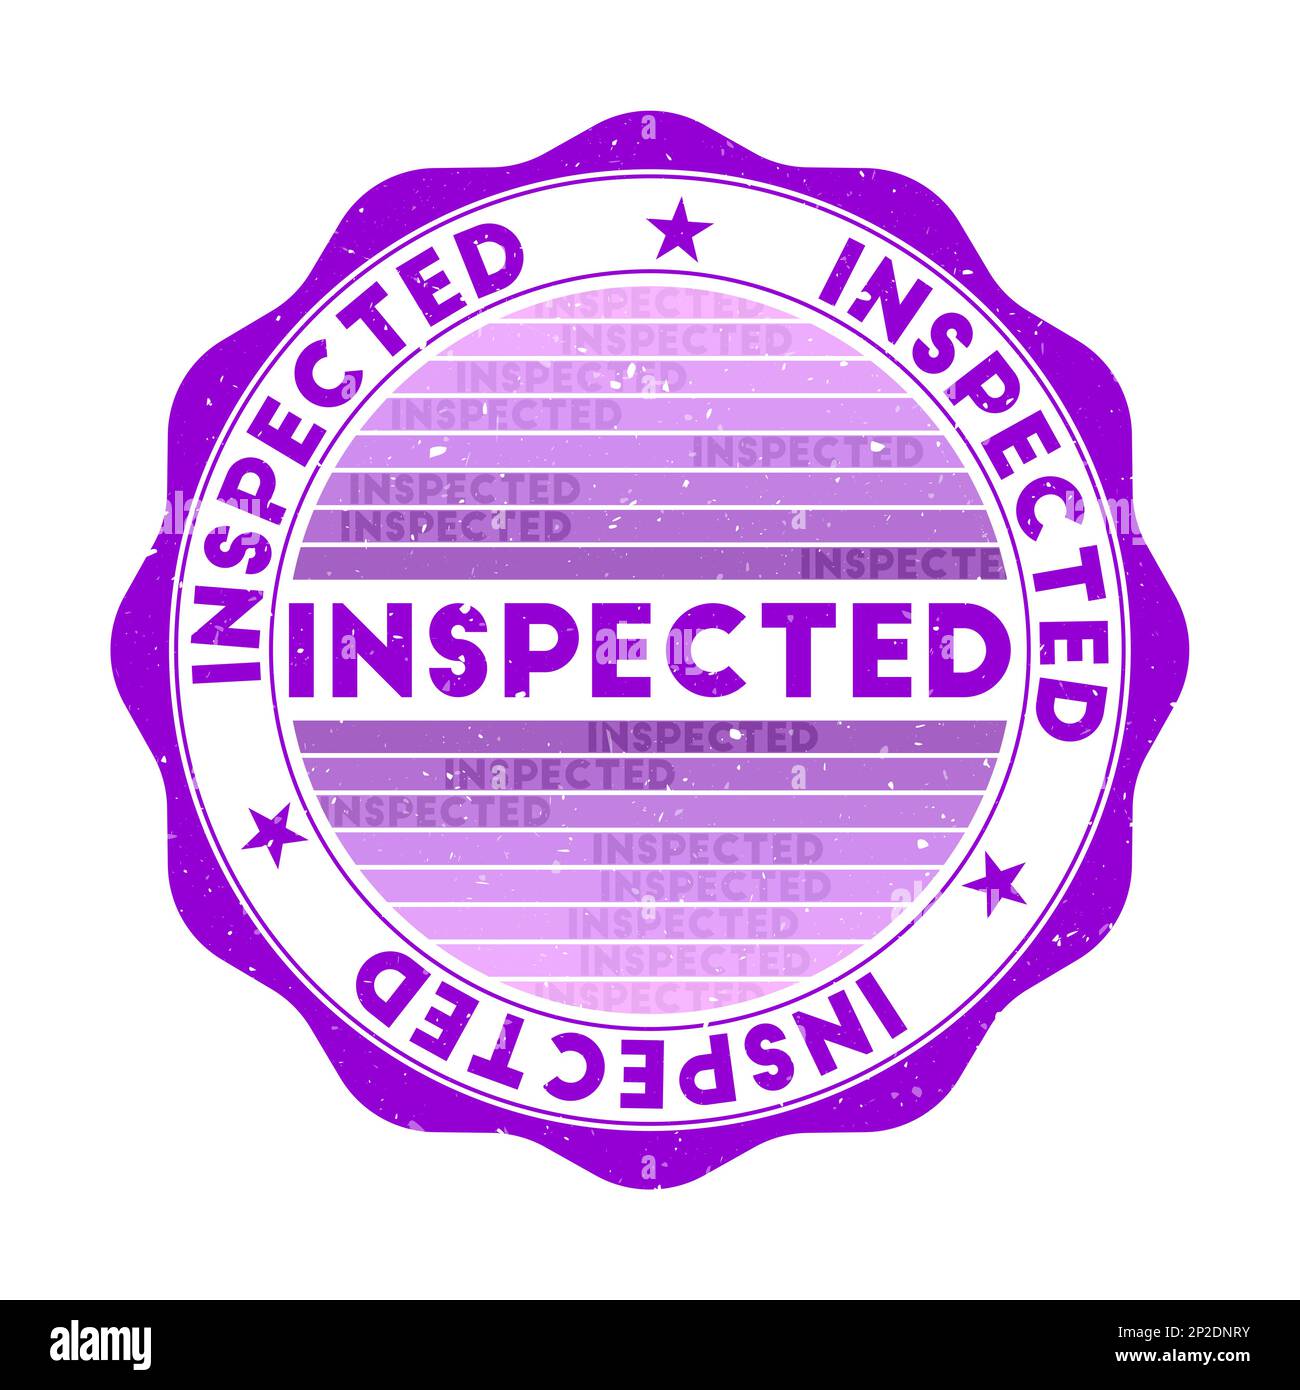 Inspected badge. Grunge word round stamp with texture in Nebula color theme. Vintage style geometric inspected seal with gradient stripes. Elegant vec Stock Vector